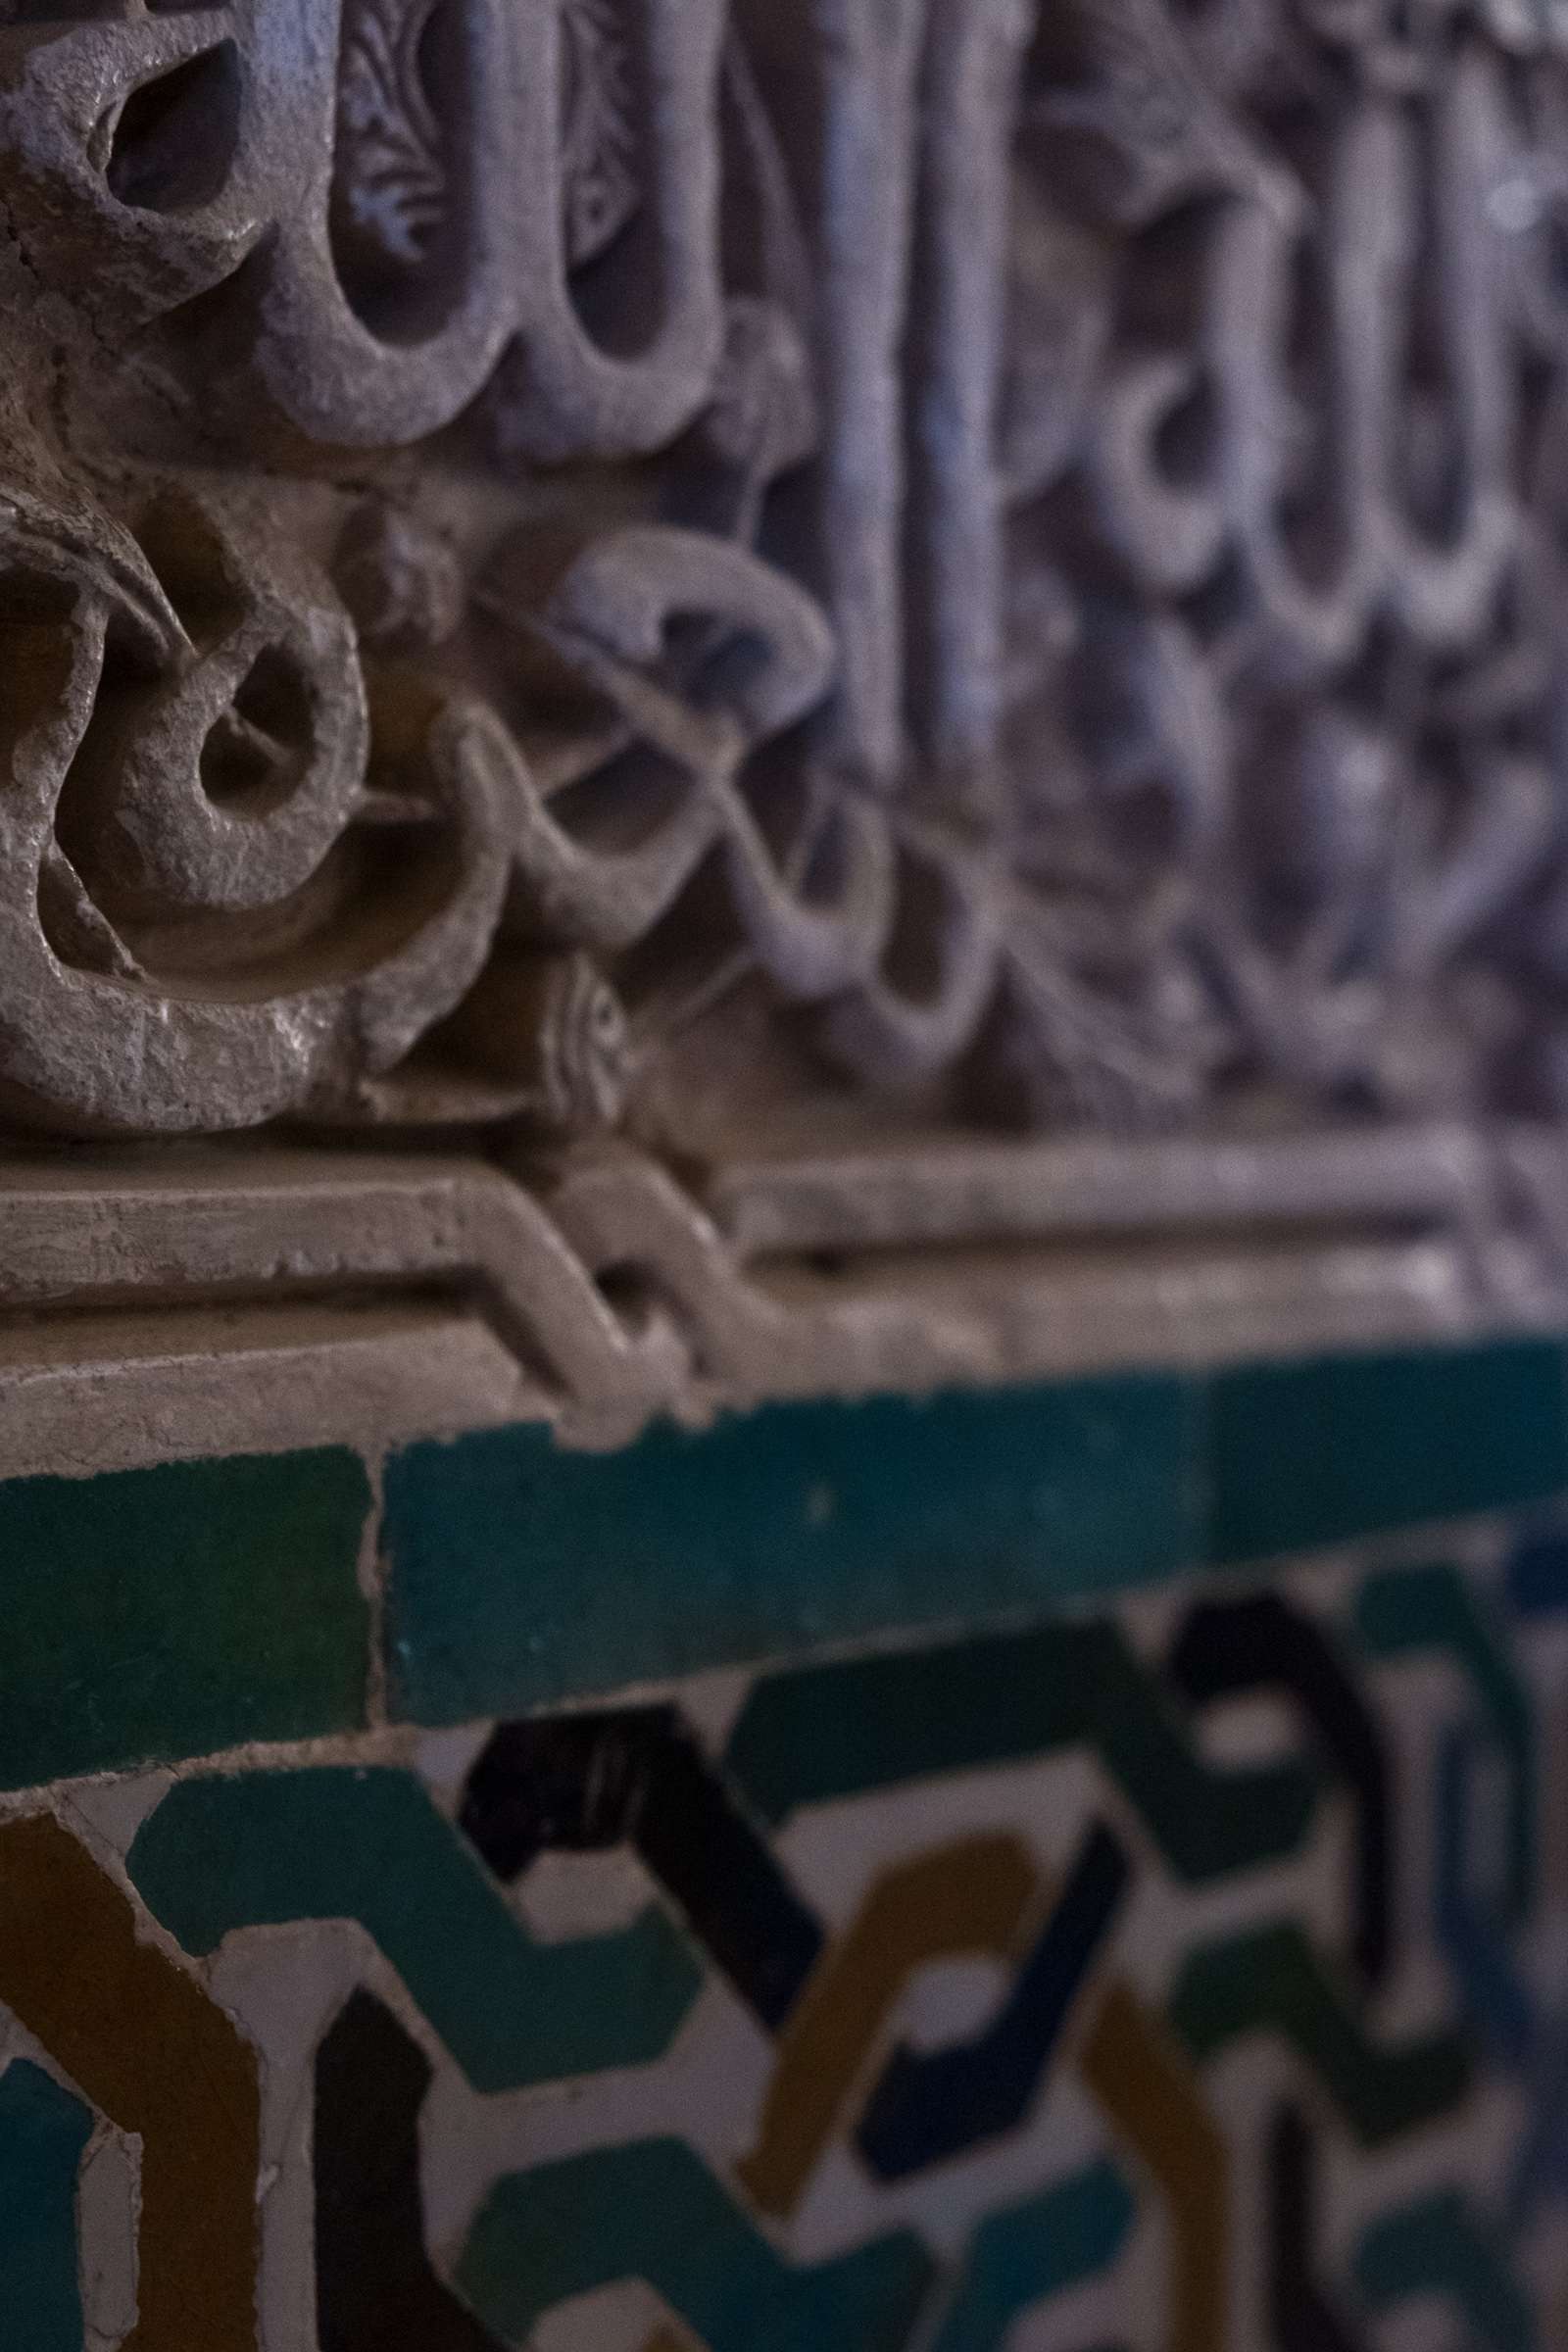 Carved Arabic letters in Nasrid Palace, The Alhambra, Granada